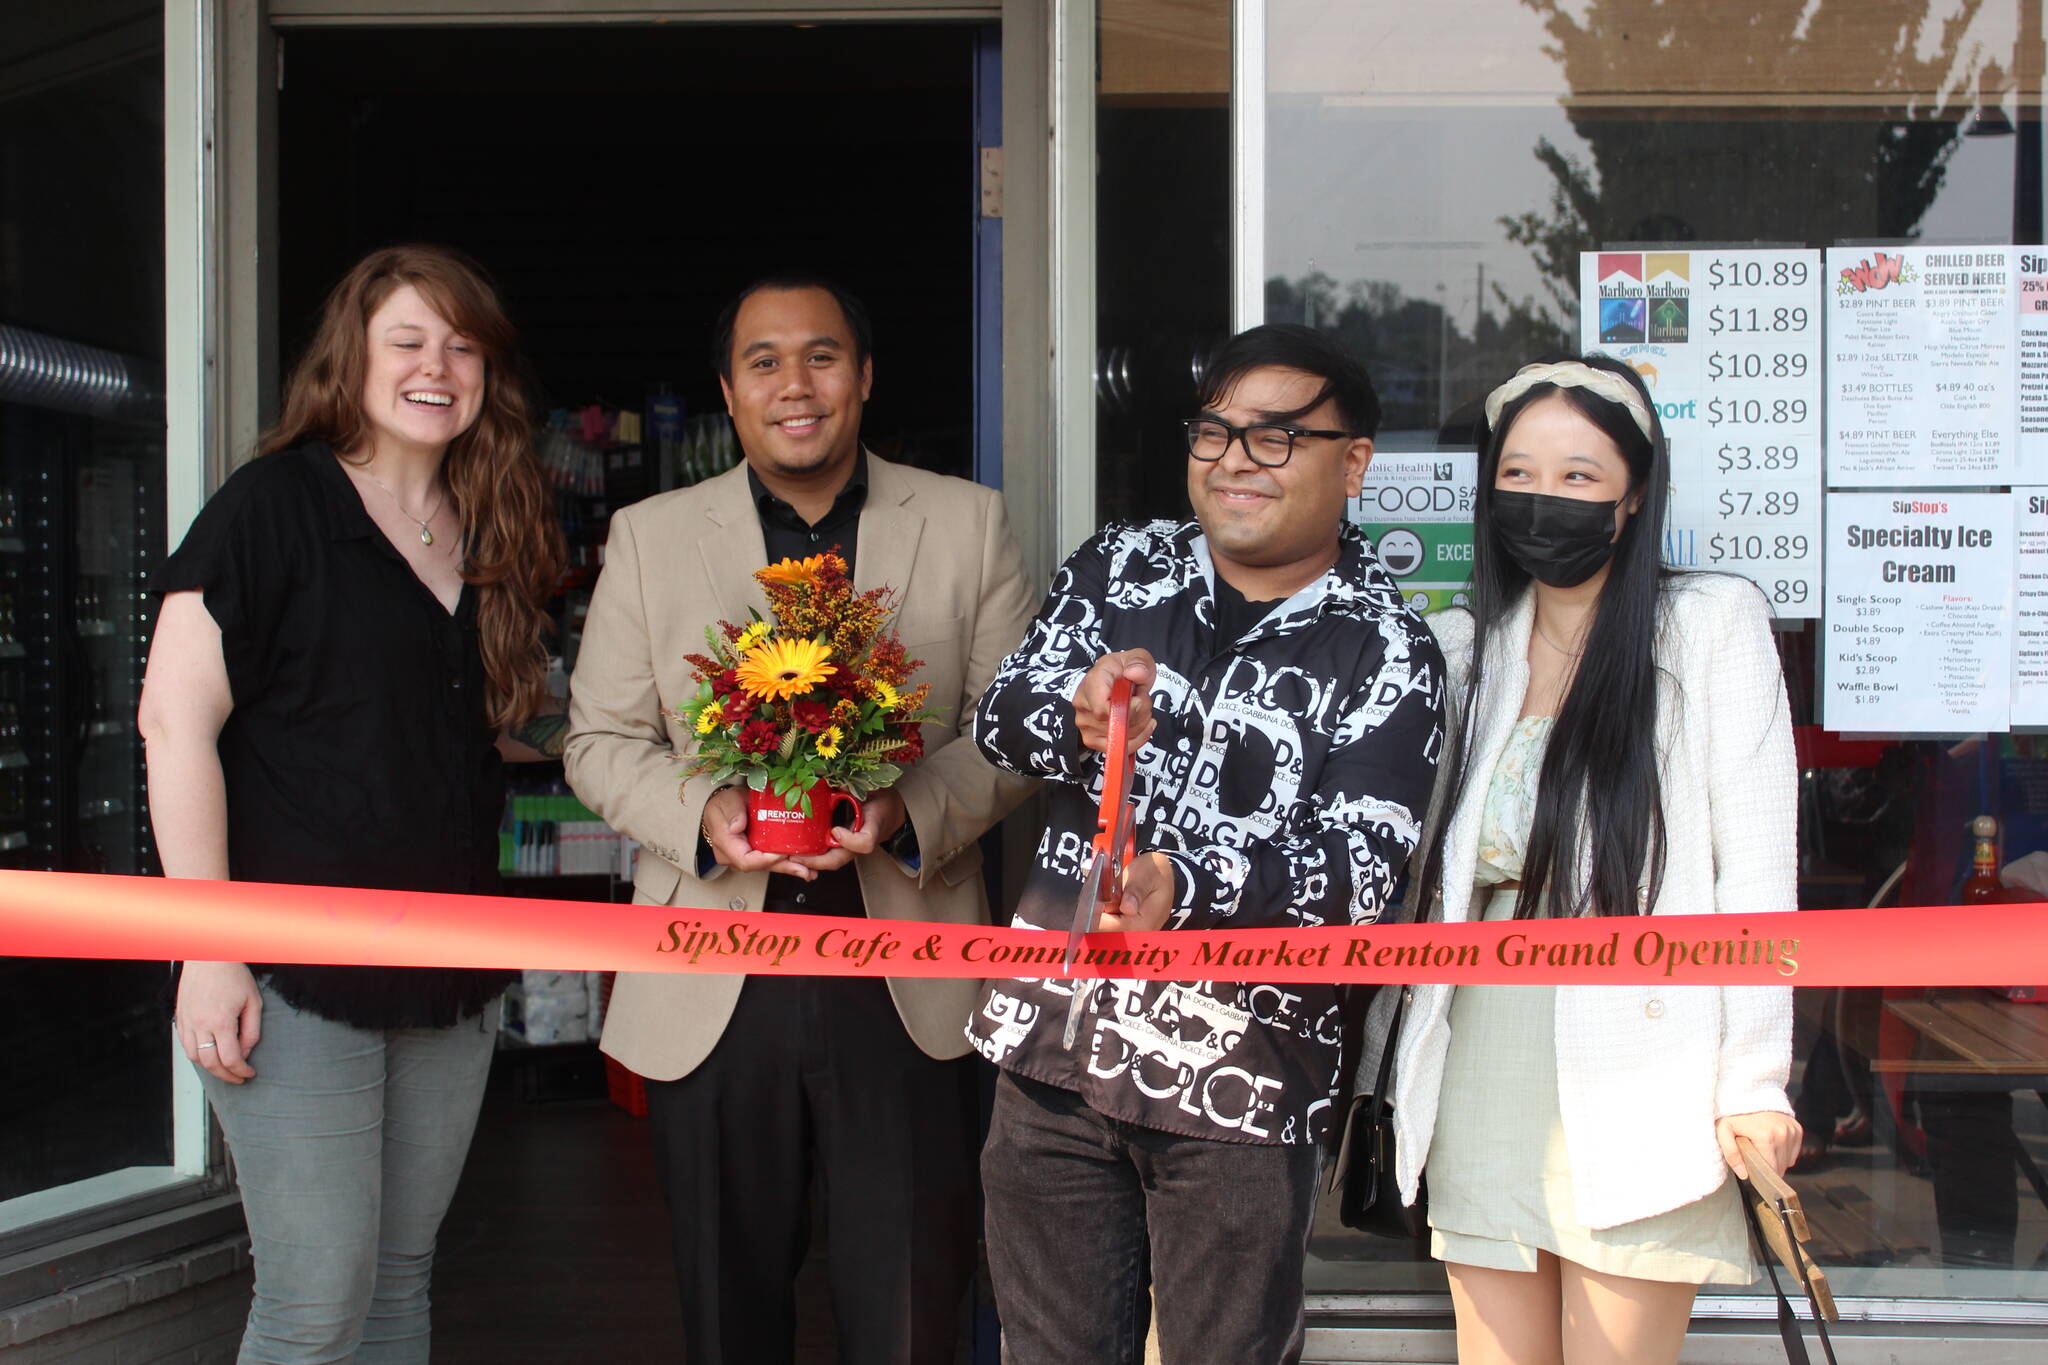 The SipStop Cafe and Community Market had a soft opening on July 22. Photos by Bailey Jo Josie/Sound Publishing.